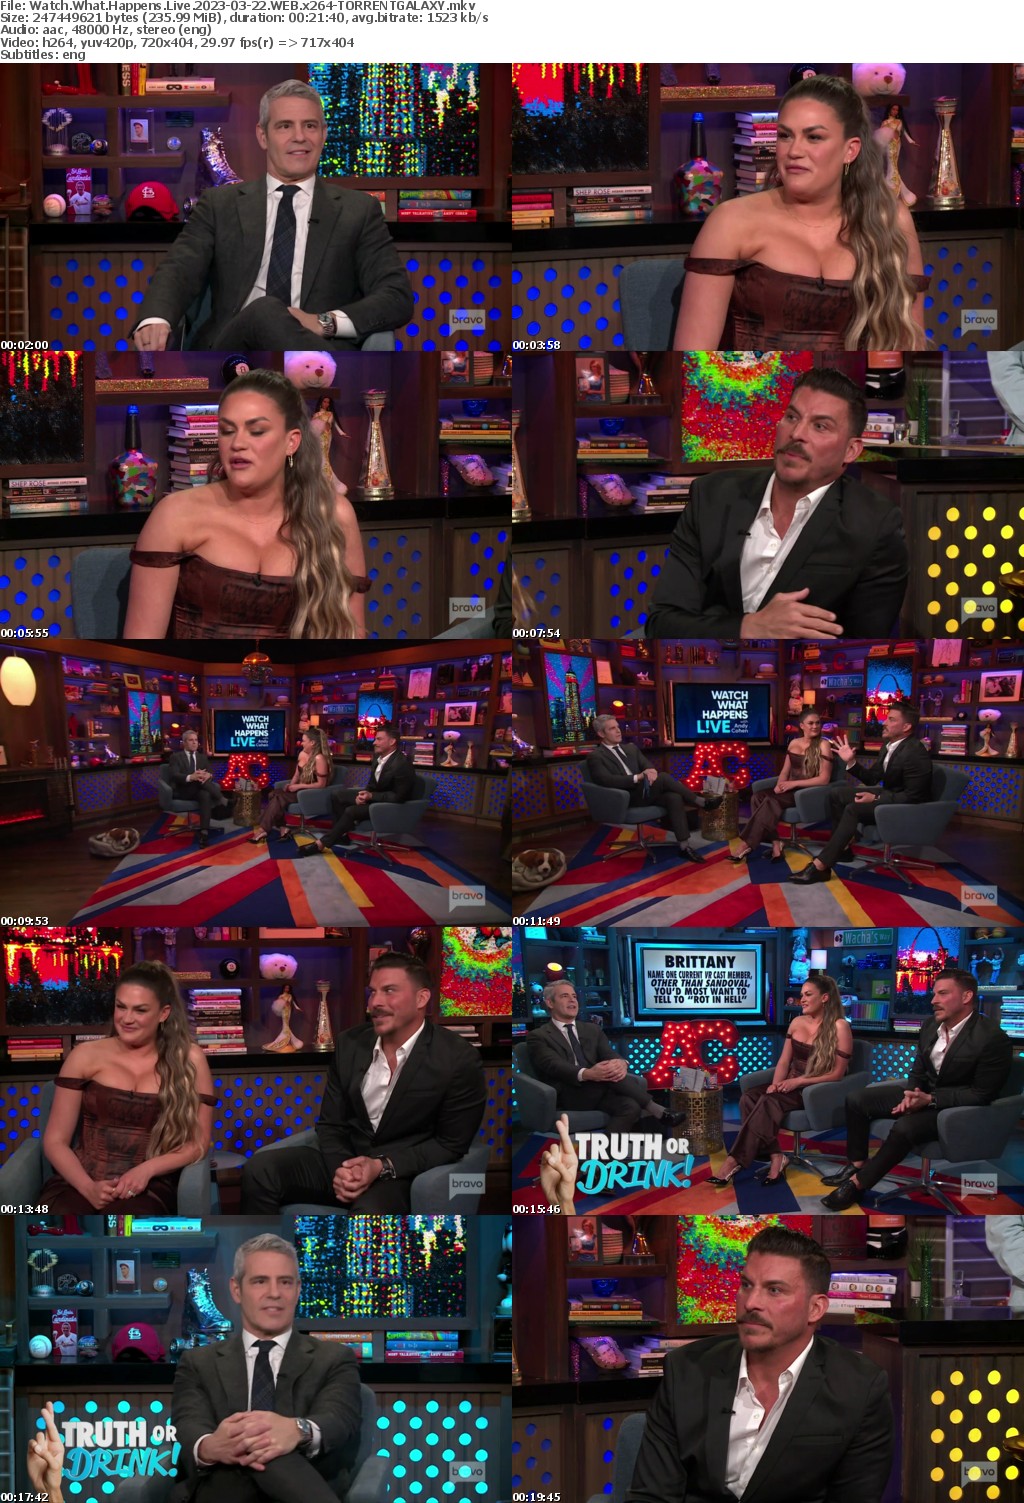 Watch What Happens Live 2023-03-22 WEB x264-GALAXY